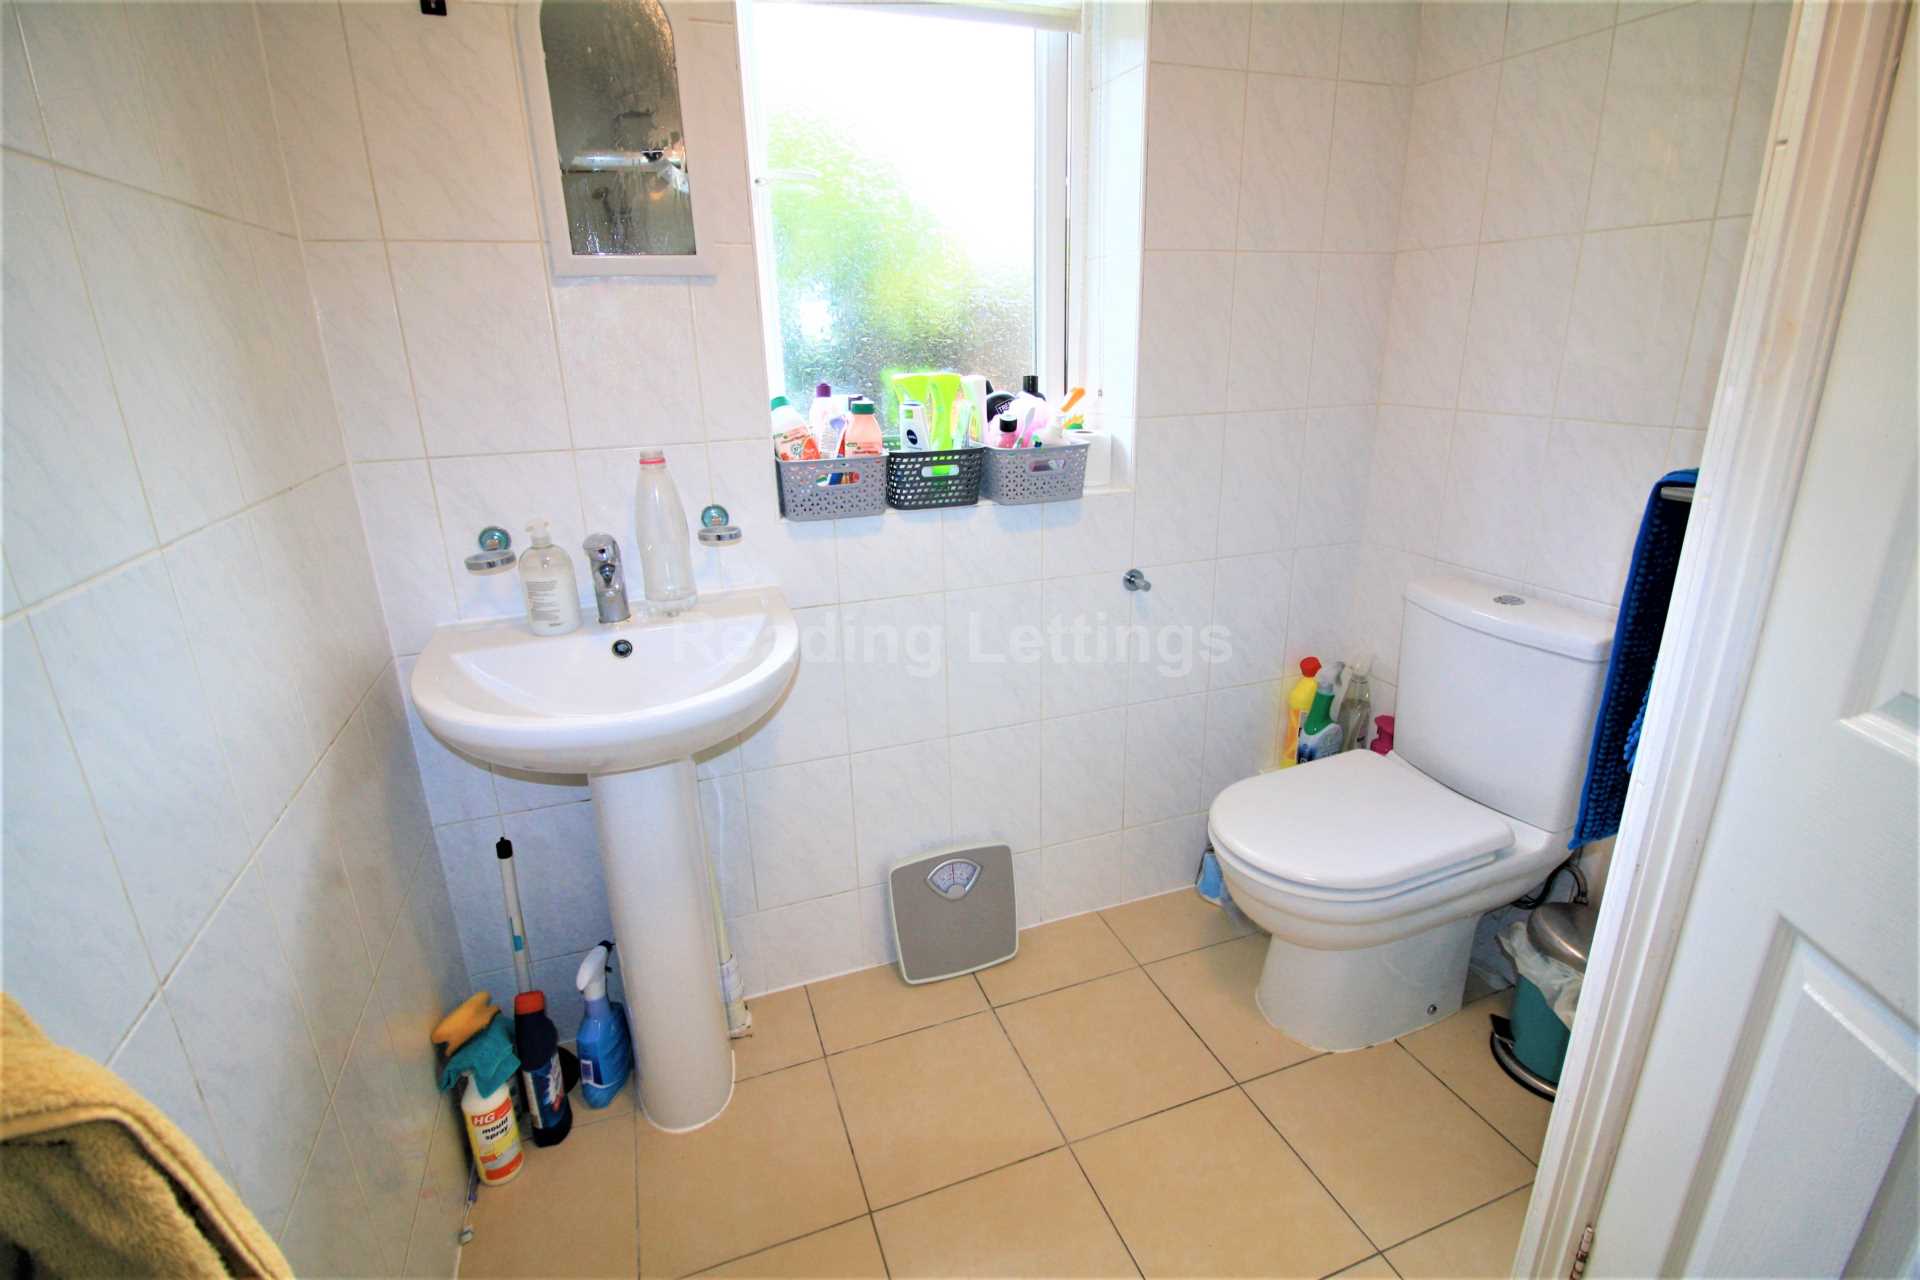 Hatherley Road, Reading - GAS INCLUDED, Image 6